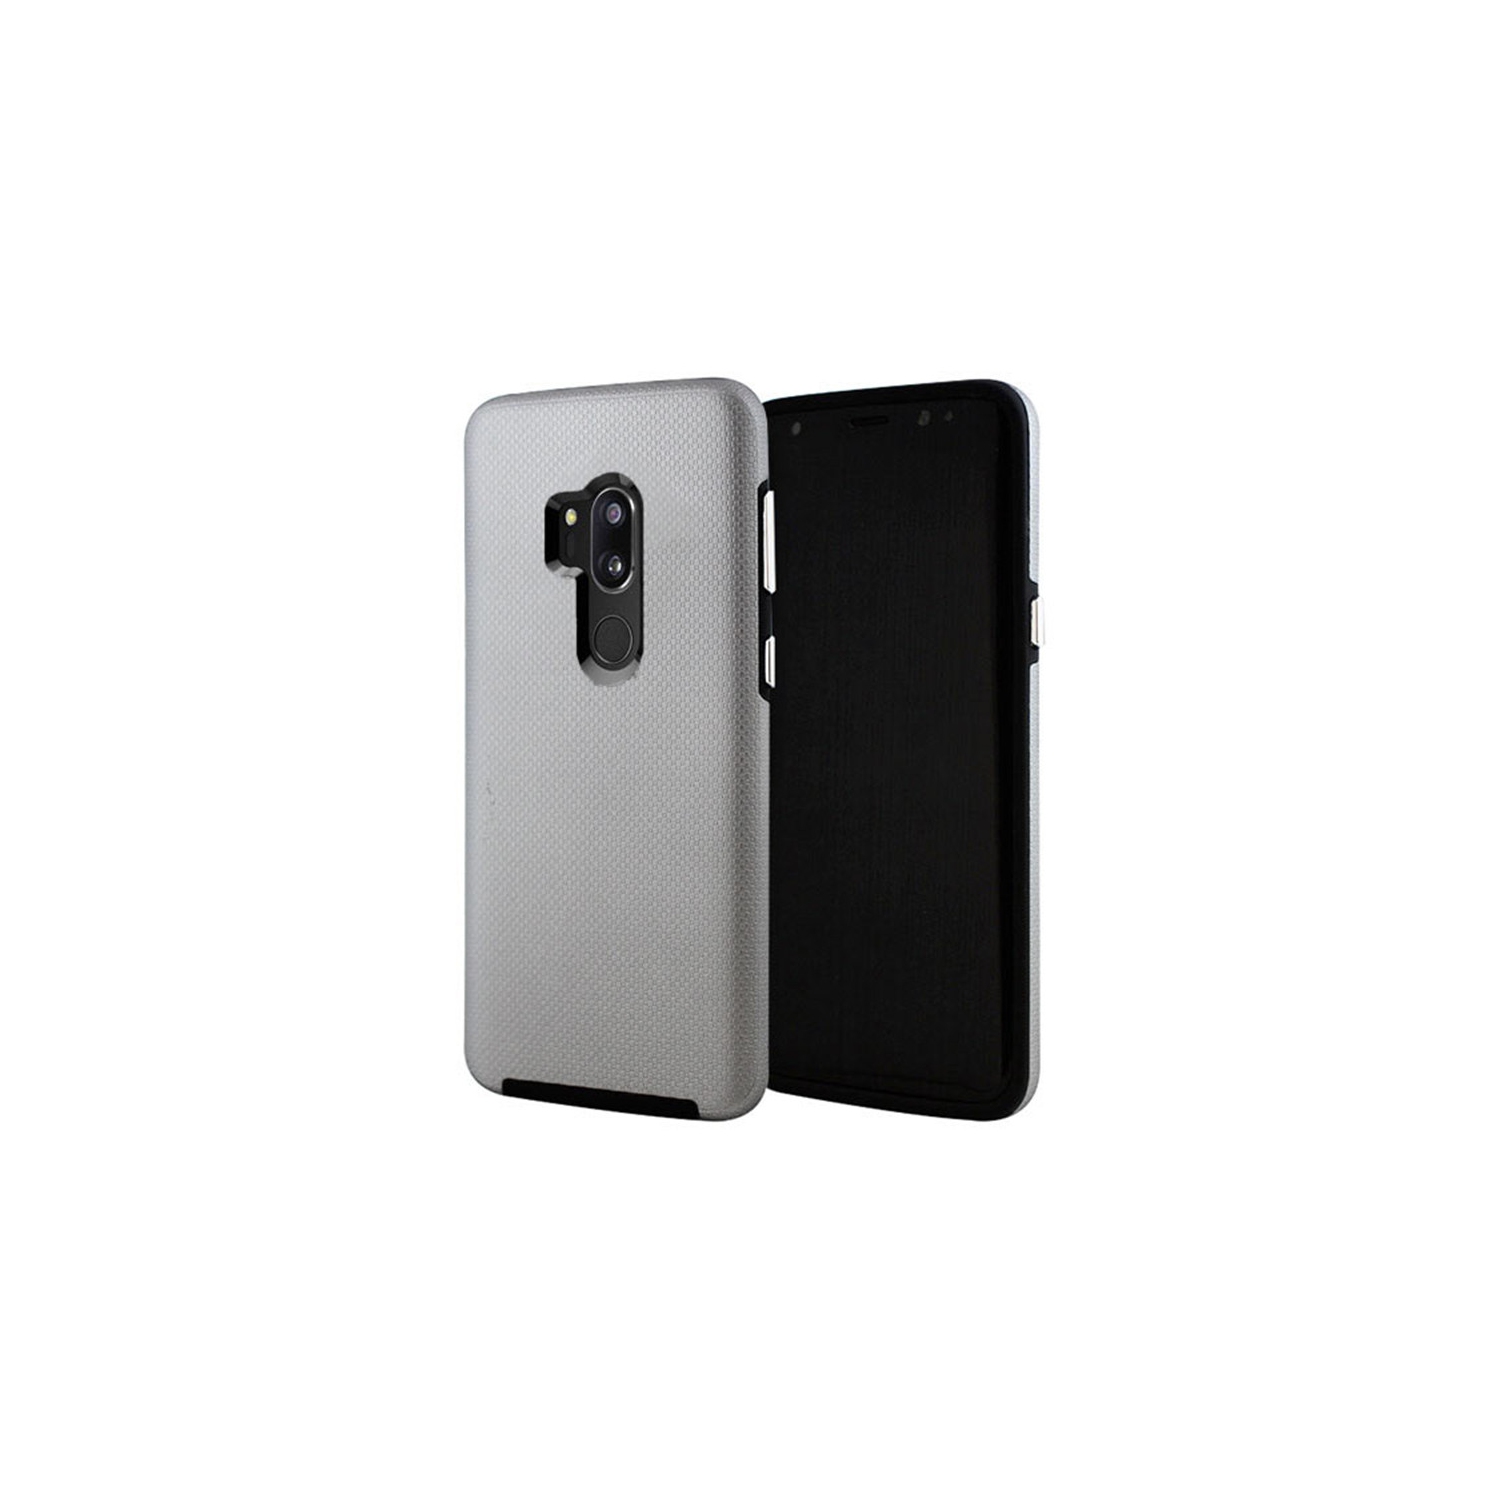 【CSmart】 Slim Fitted Hybrid Hard PC Shell Shockproof Scratch Resistant Case Cover for LG G7 ThinQ / G7 One, Silver